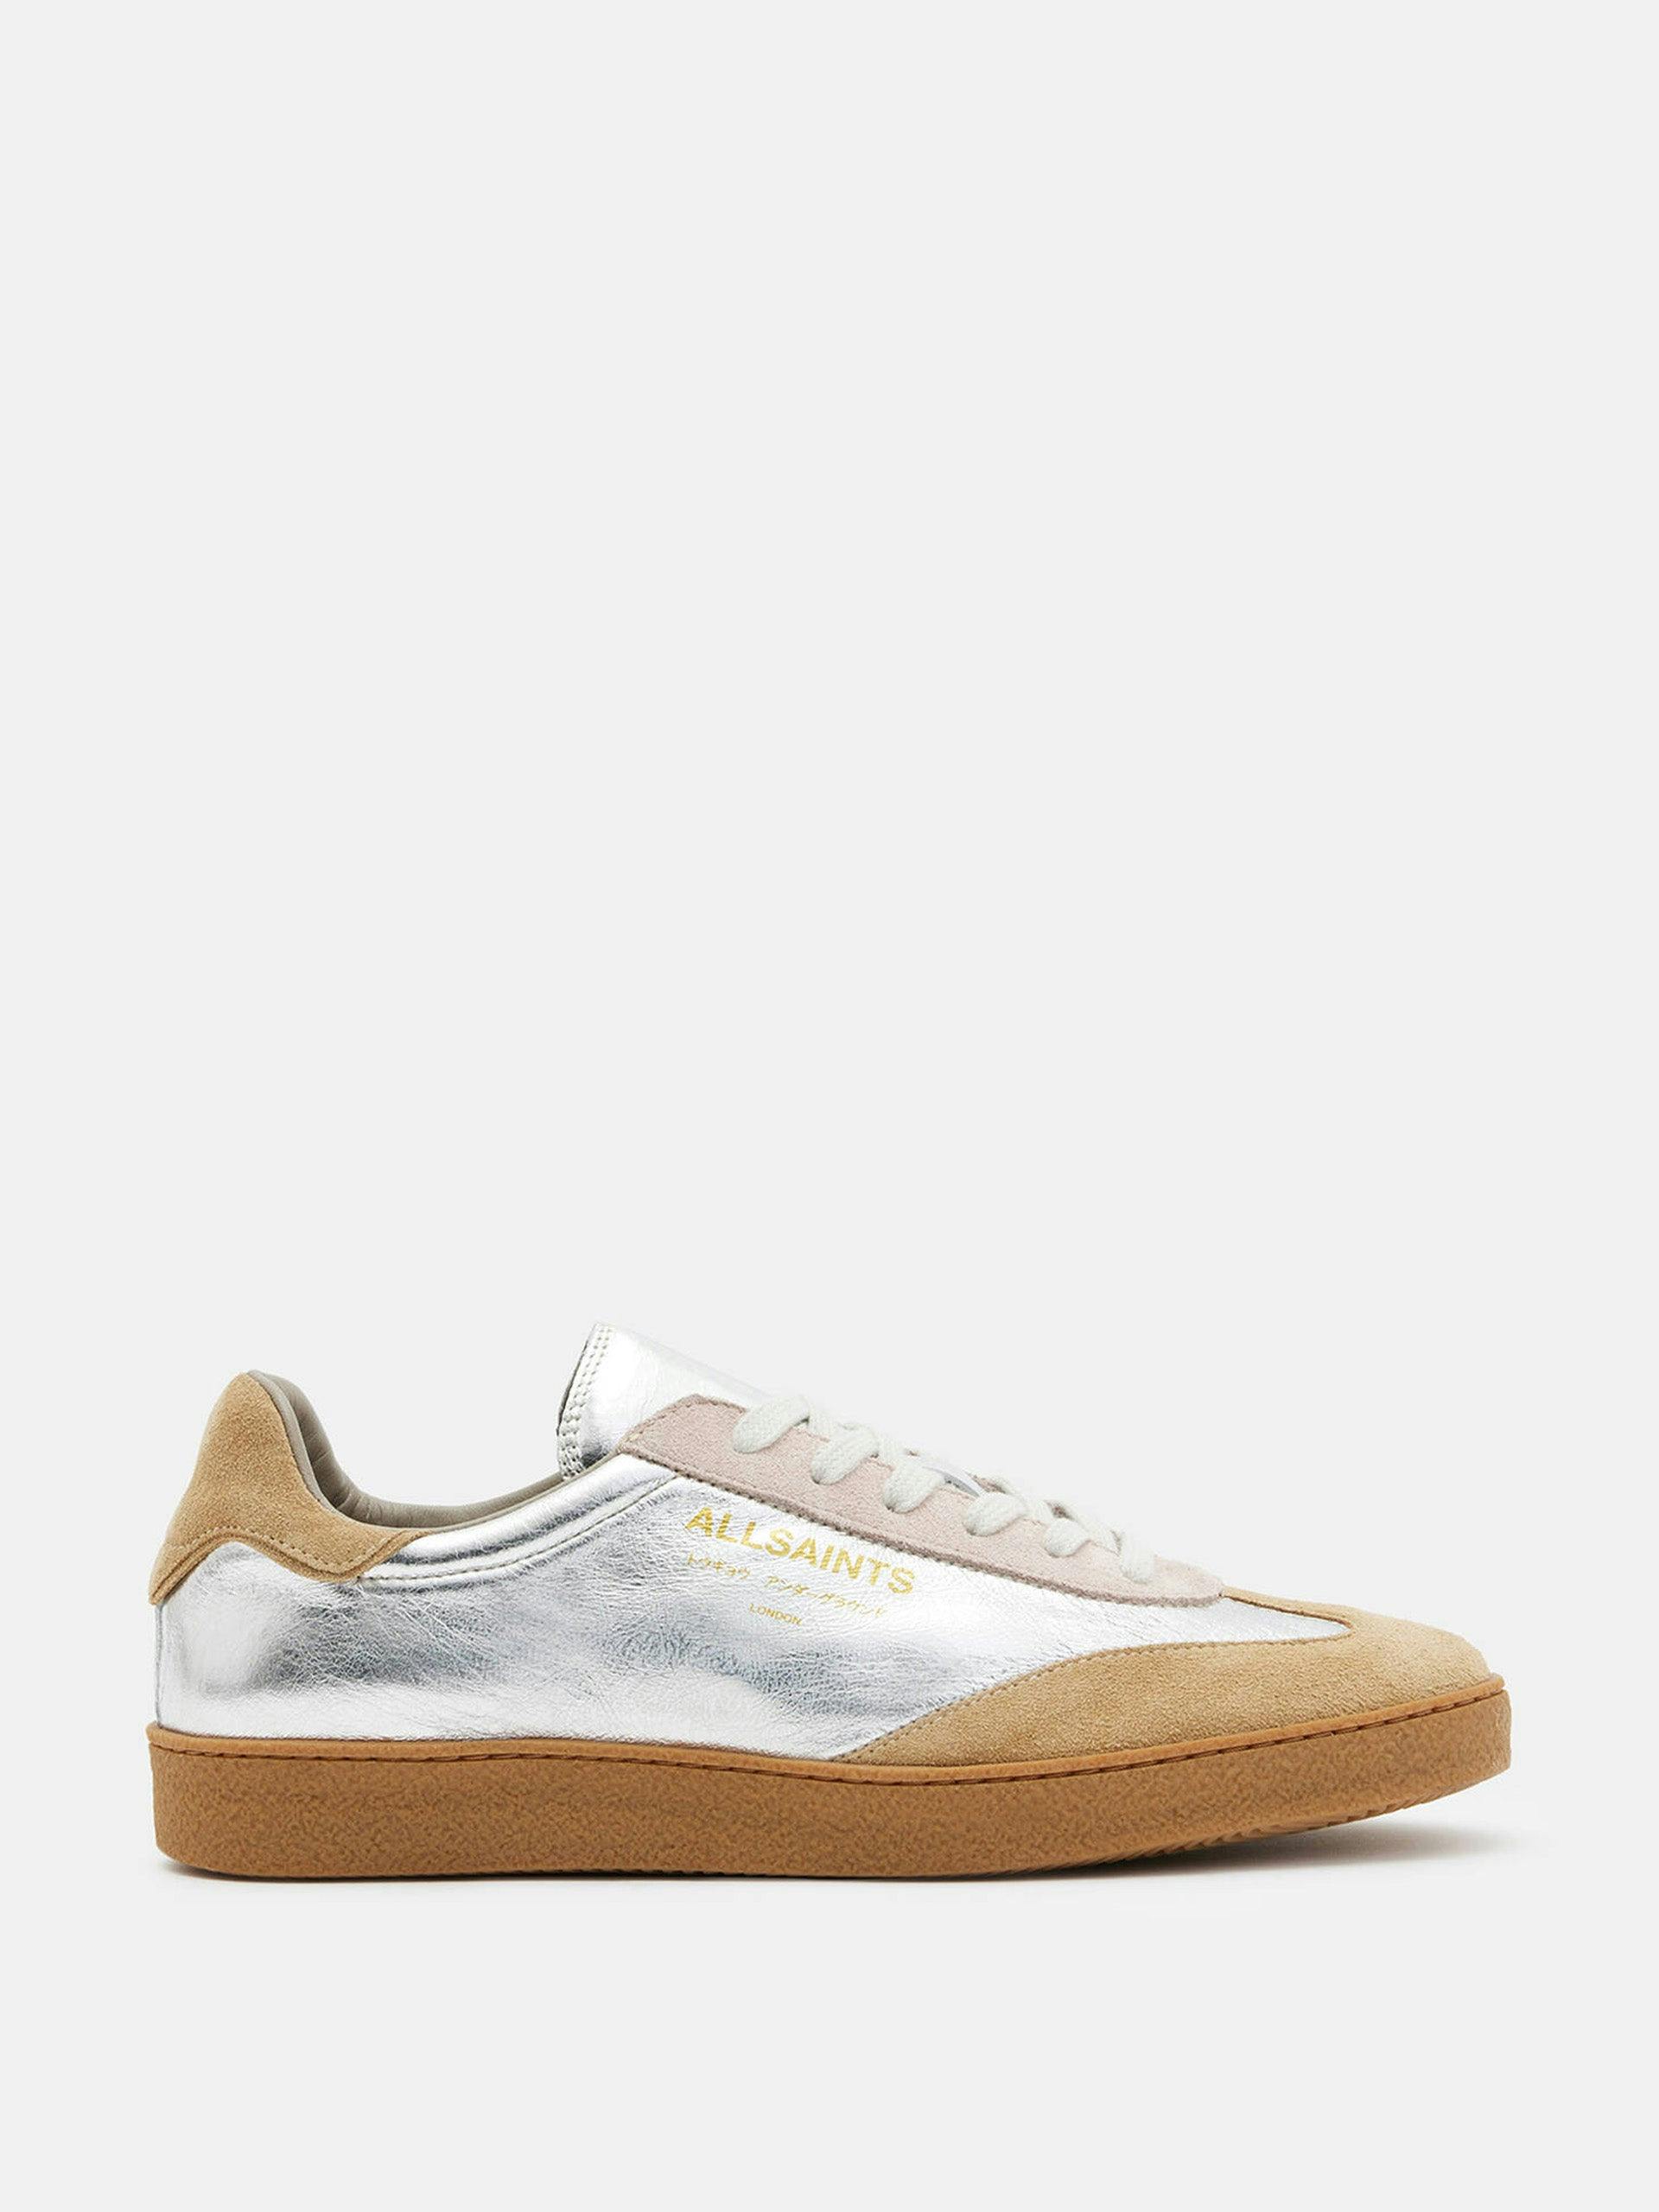 Thelma suede low top trainers